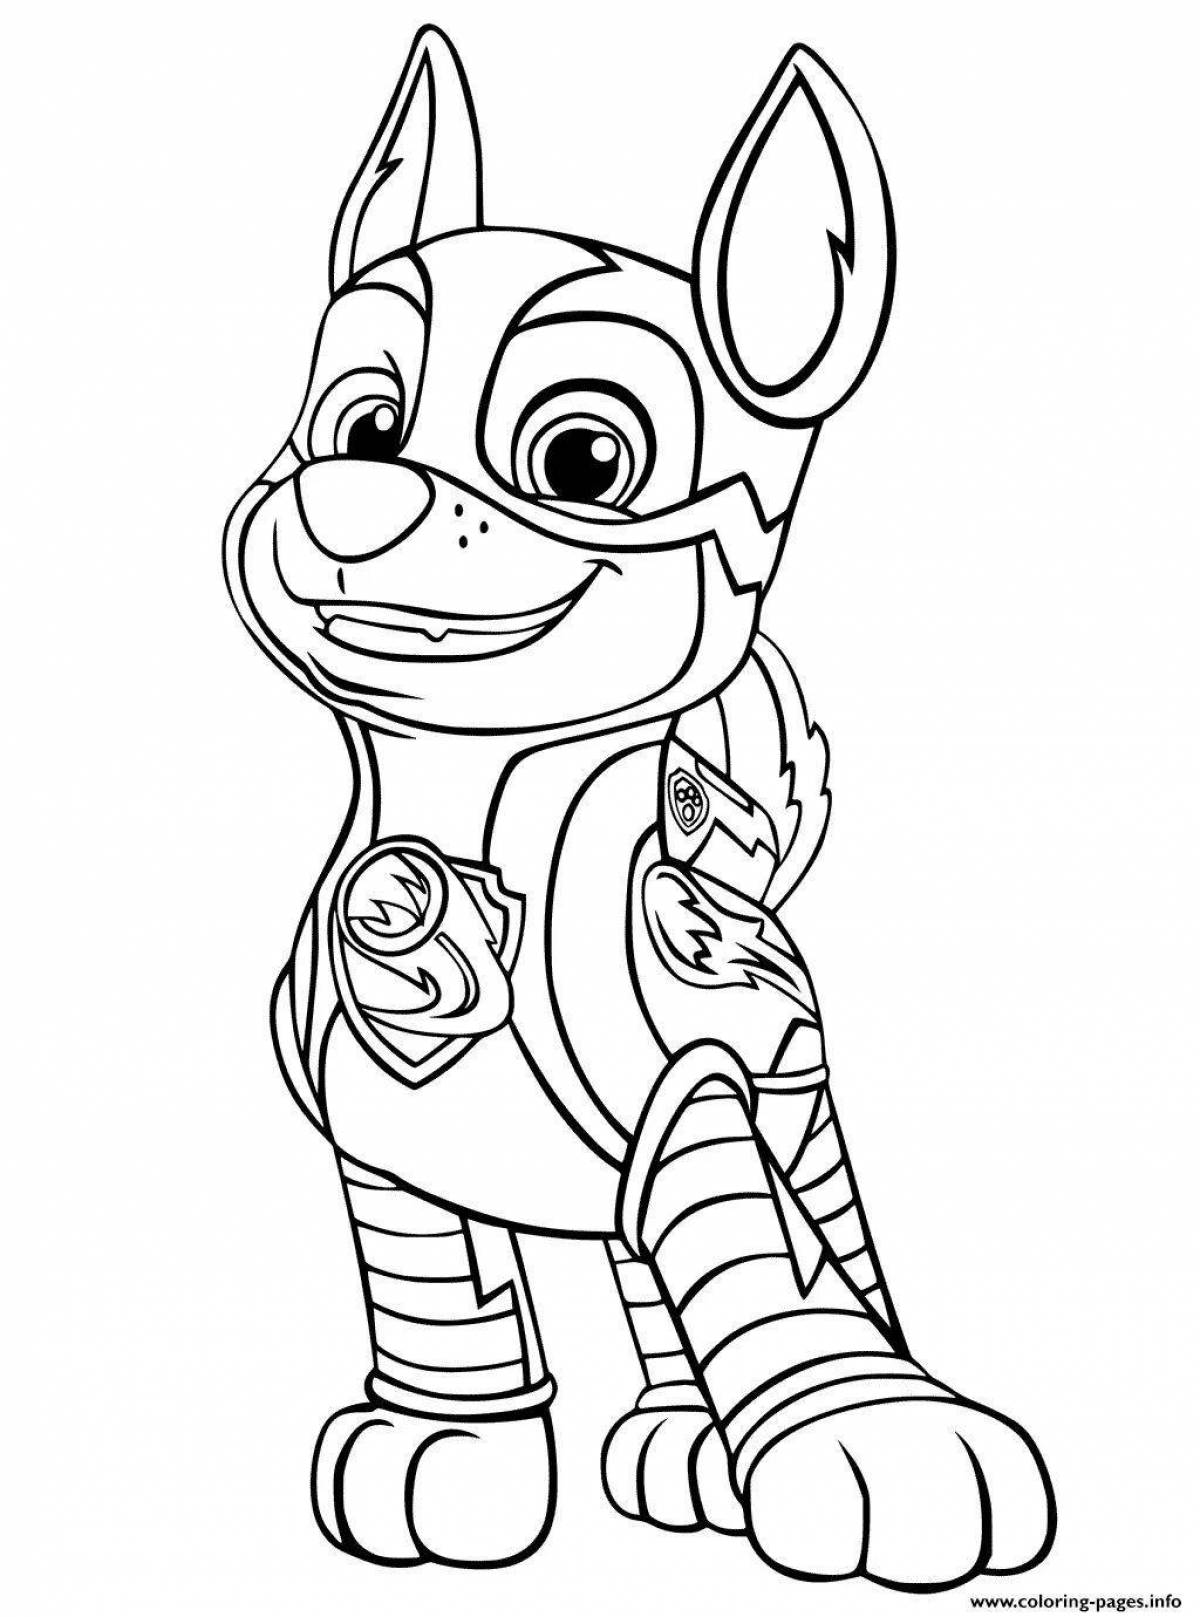 Wiggly everest puppy coloring page